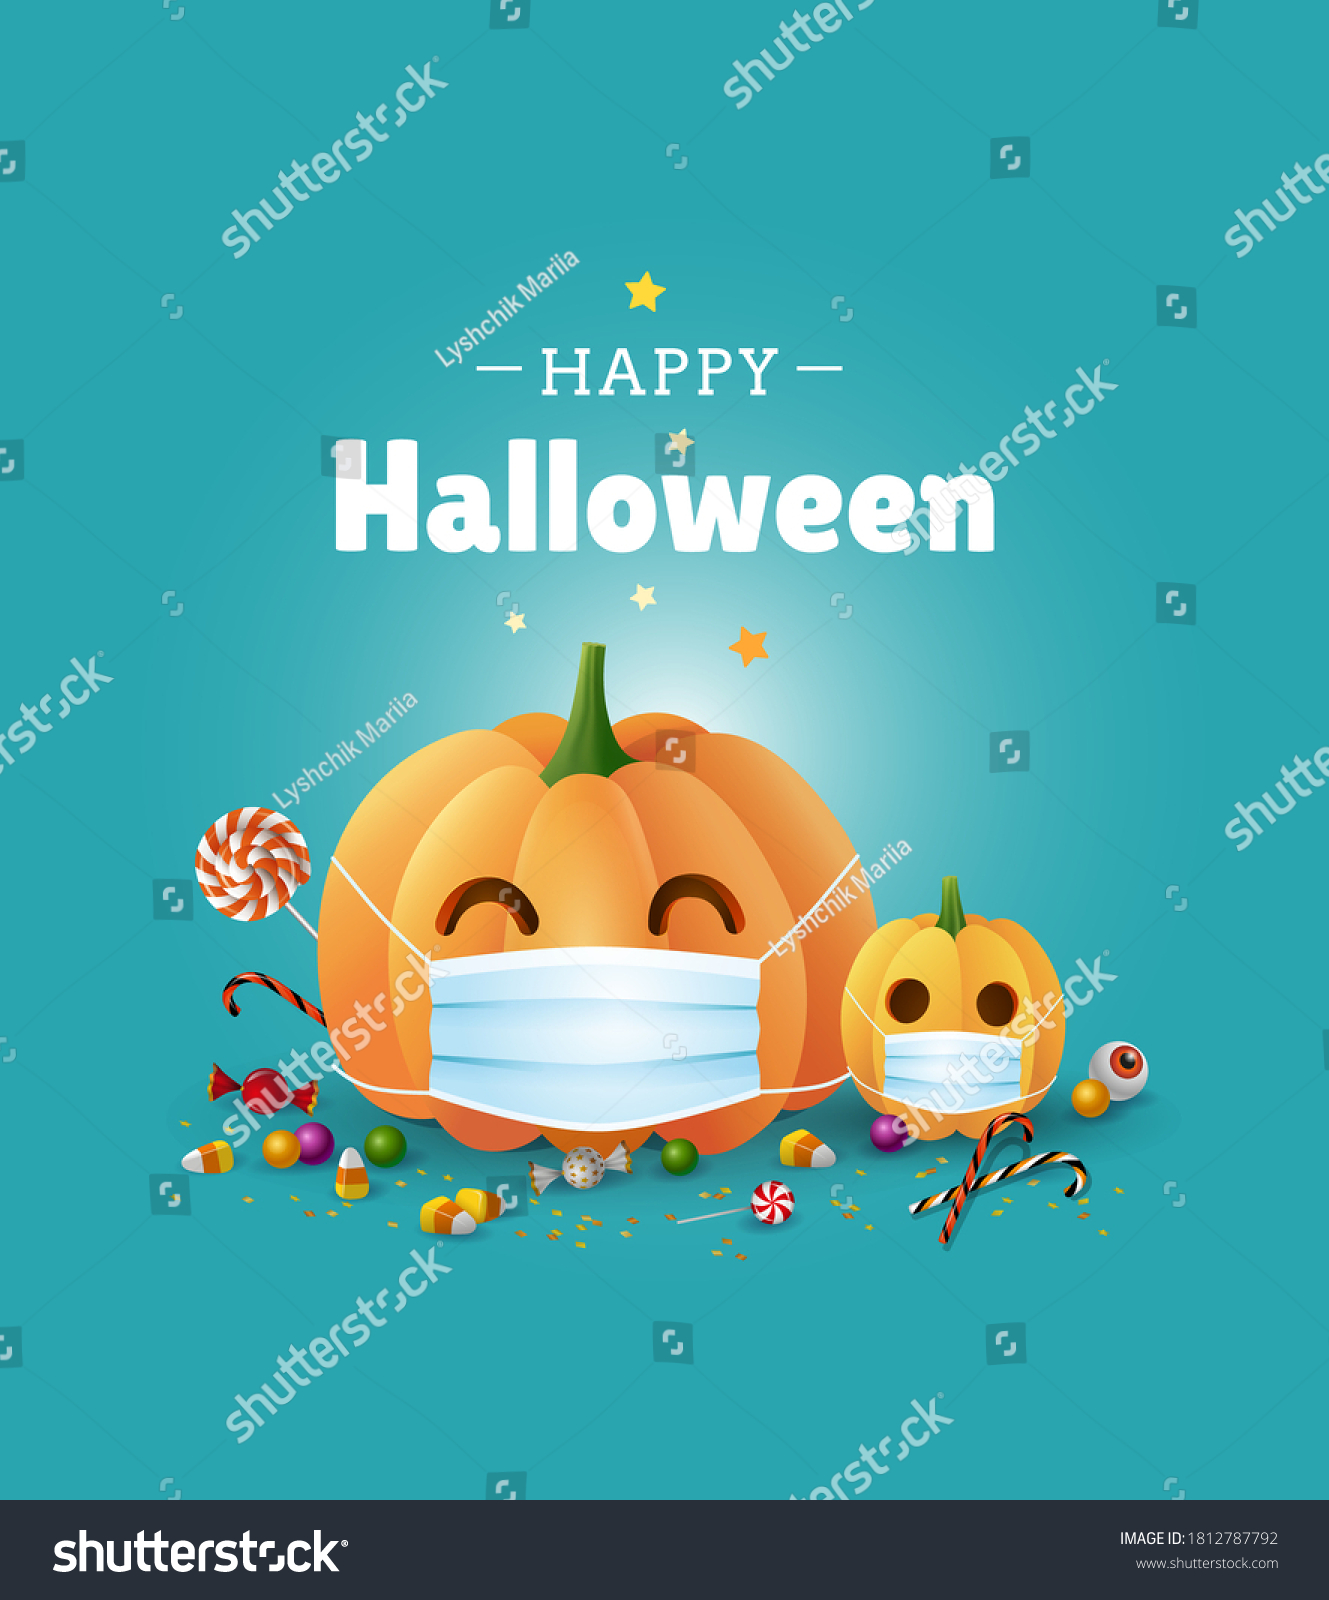 Happy Halloween greeting card design. Cute illustration with pumpkins wearing face masks for protection from coronavirus and sweets on green background. - Vector #1812787792